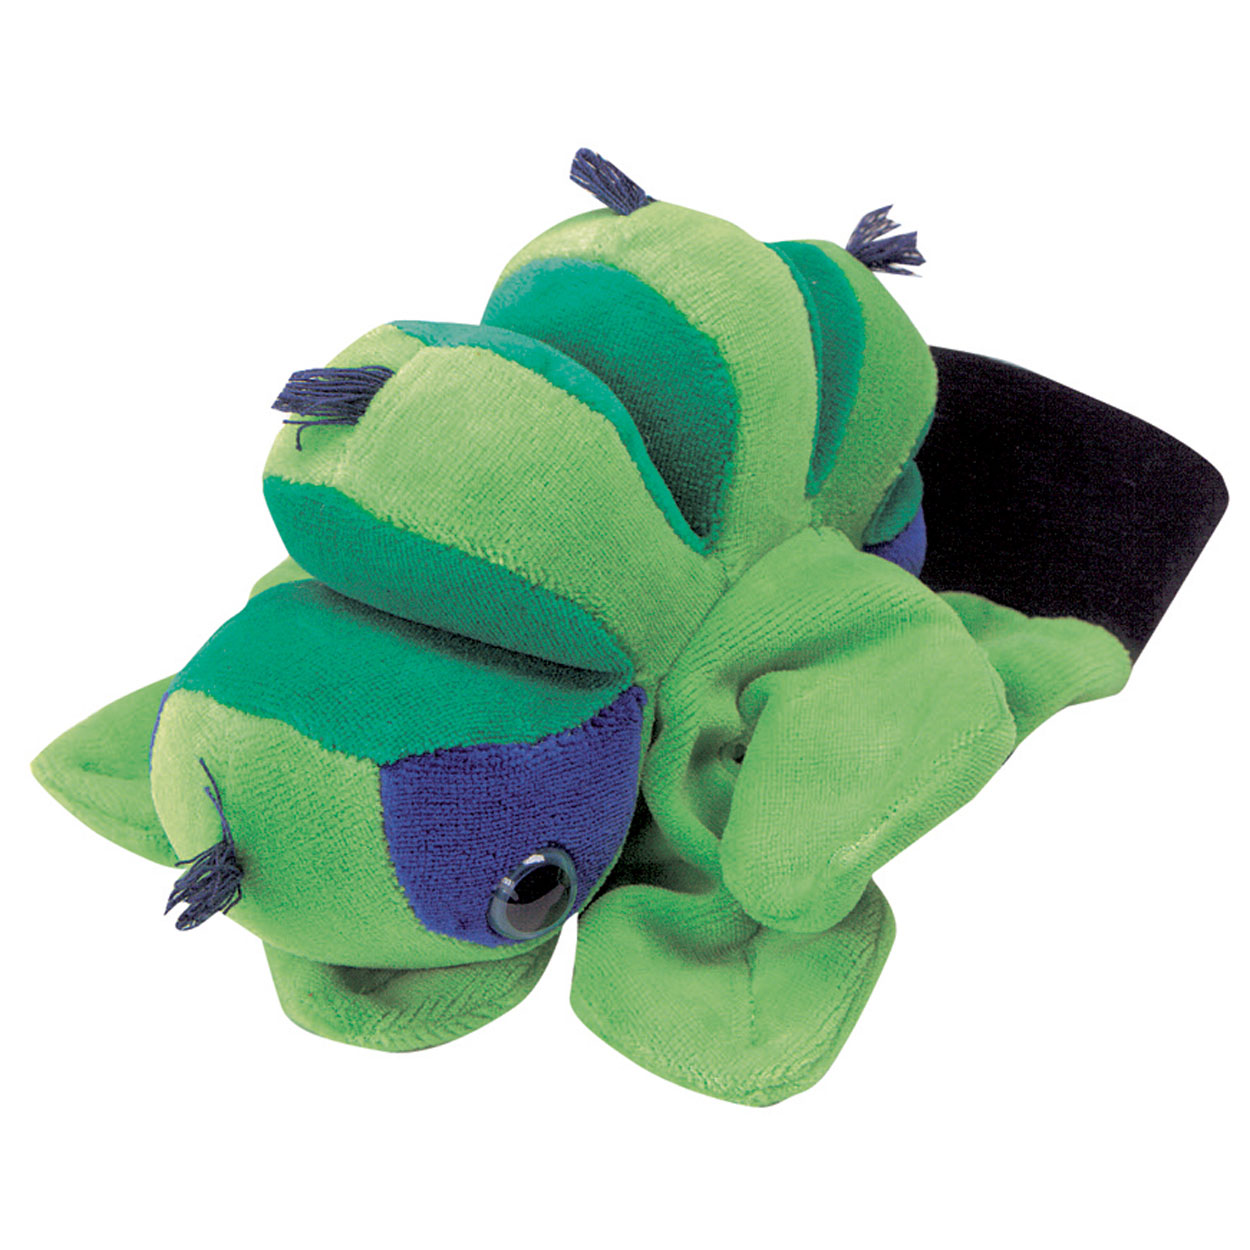 Beleduc 40111 Hand Puppet Multi-Coloured 